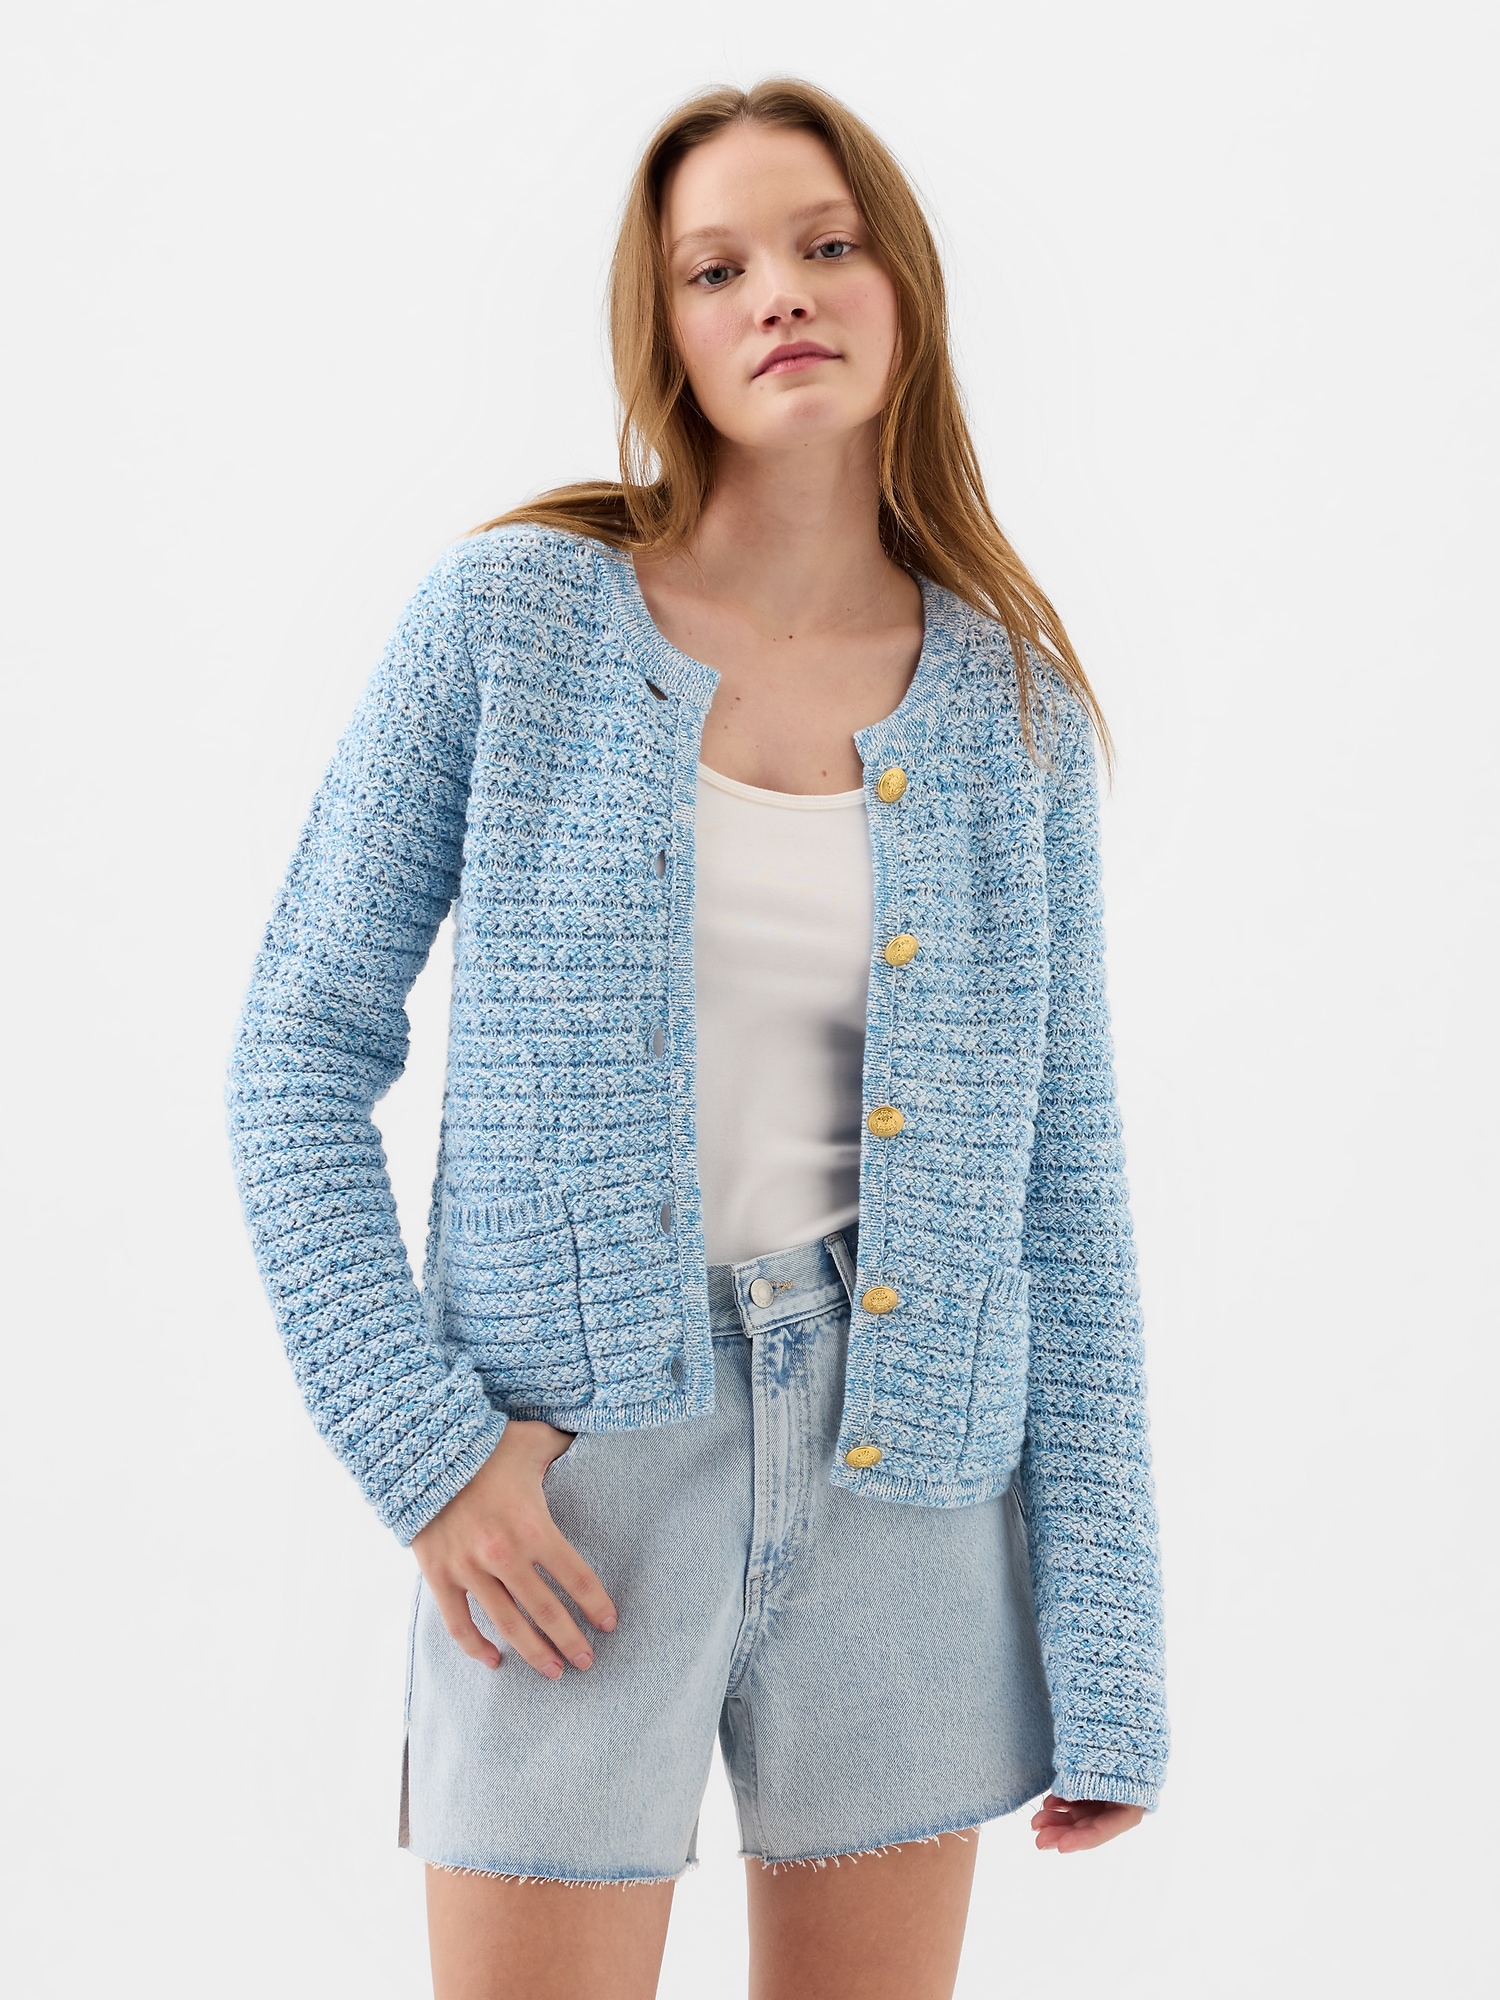 Casual Top Women Long Cardigan Sweater Jacket 2022 Winter New Solid V neck  Pocket Button Knitwear Vintage Twist Cardigans Women | Cardigan sweaters  for women, Women sweaters winter, Women long cardigan